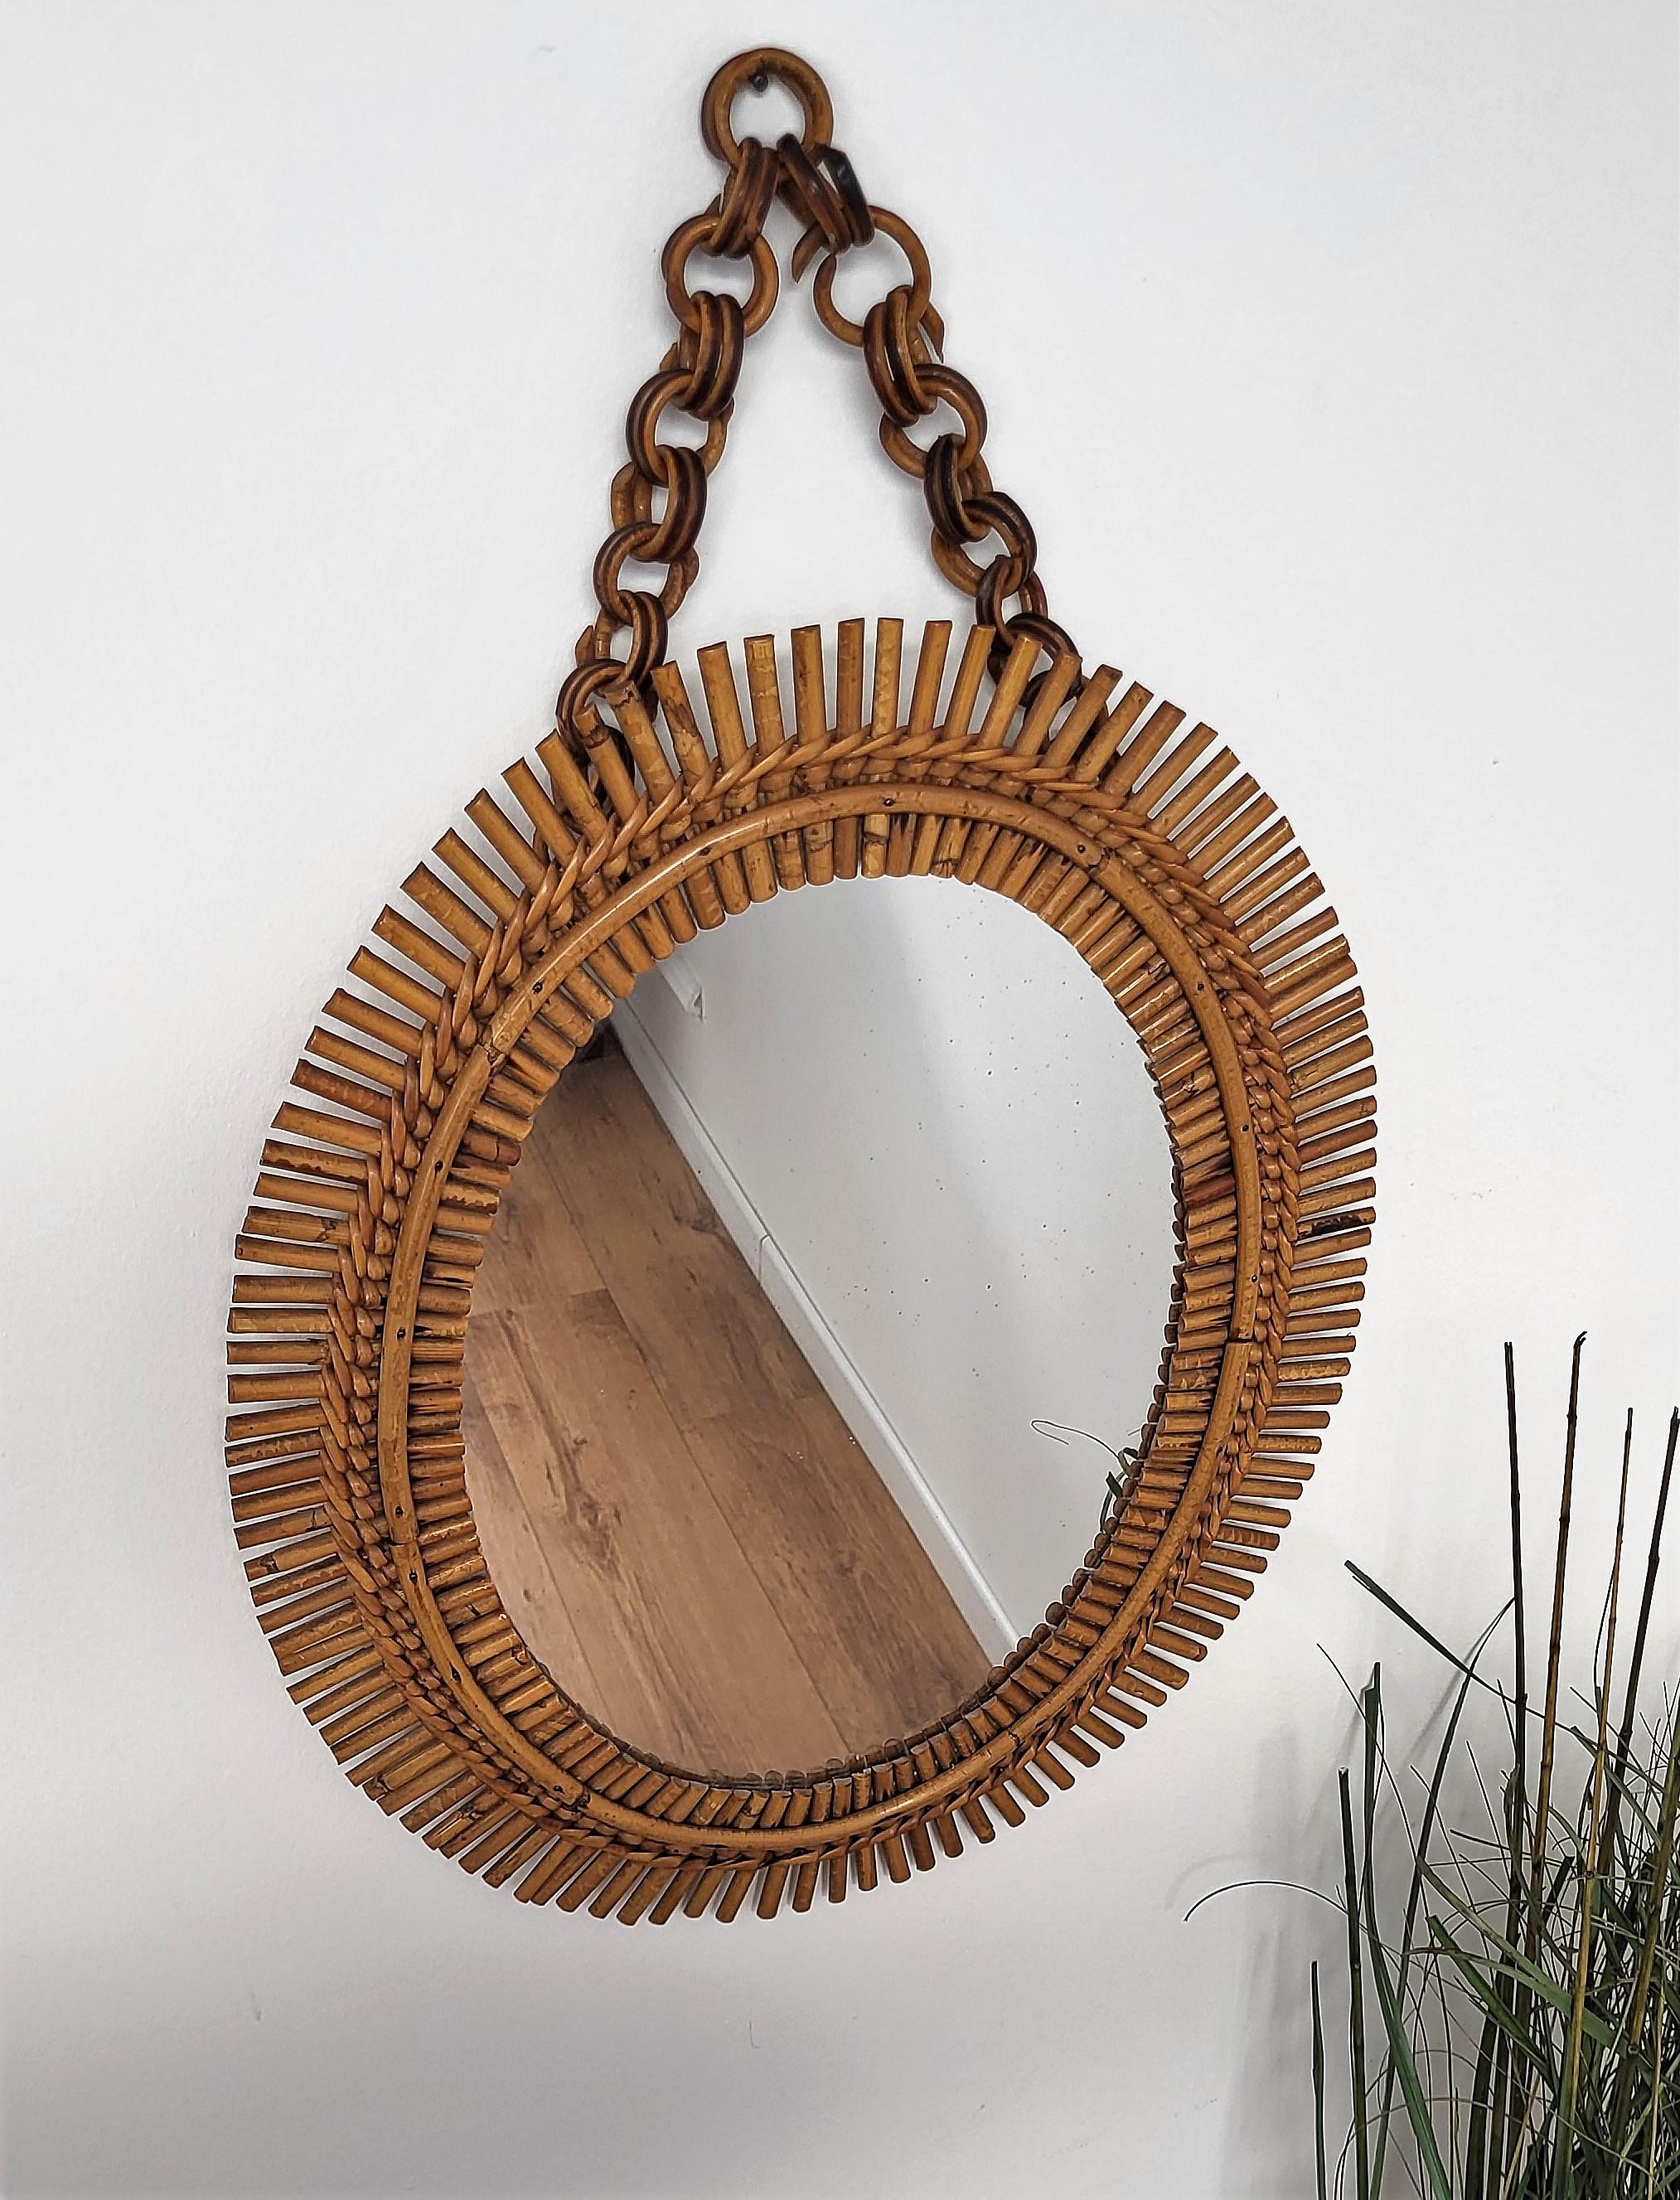 20th Century 1970s Italian Bamboo Rattan Bohemian French Riviera Oval Wall Mirror with Chain